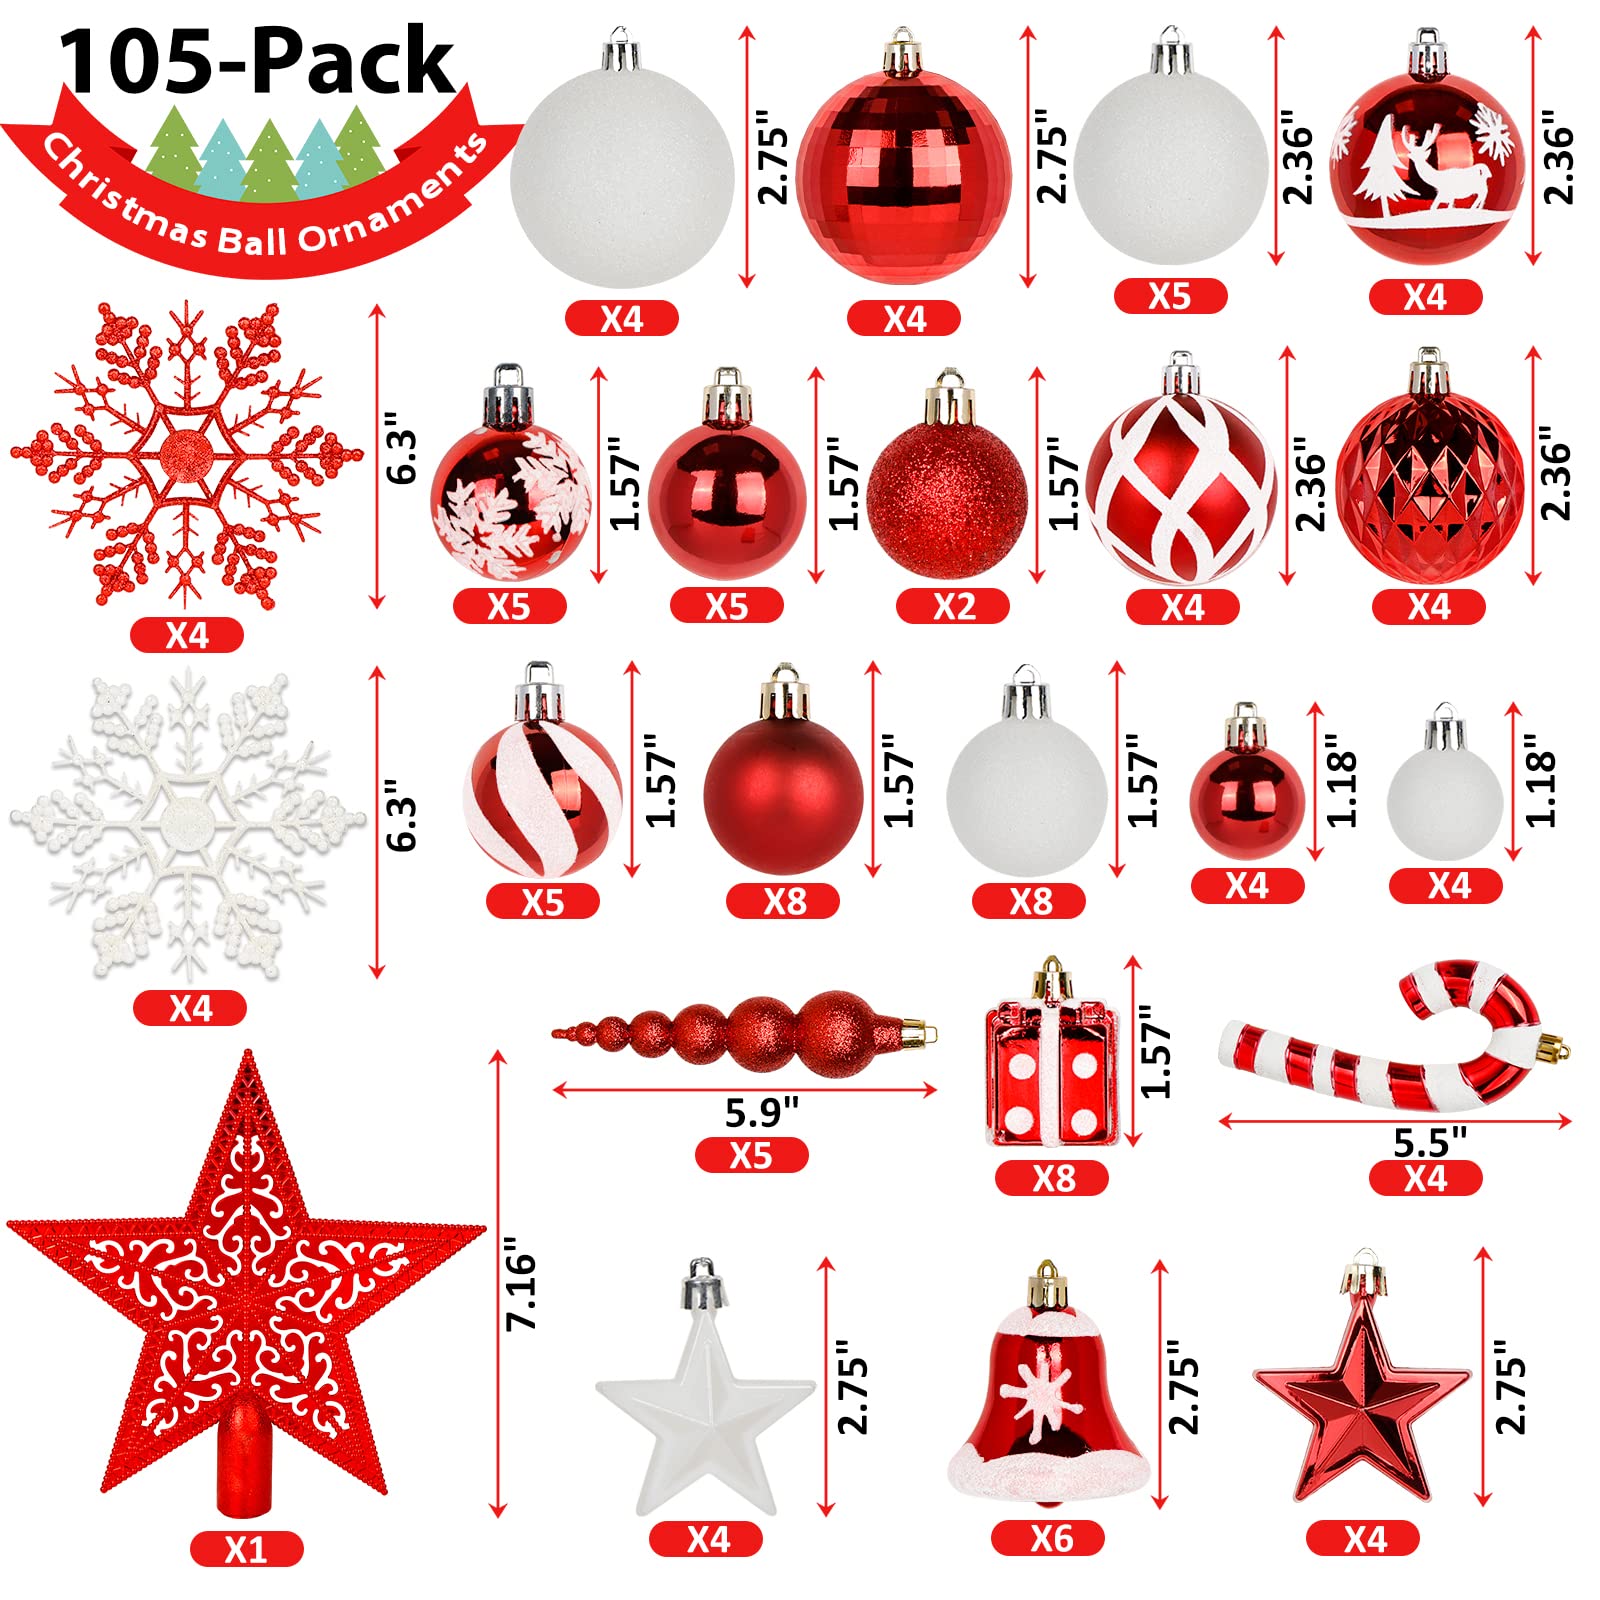 OurWarm 105pcs Christmas Ball Ornaments, Shatterproof Christmas Ornaments Sets for Christmas Tree Decorations, Holidays, Home, Party Decorations, Tree Ornaments